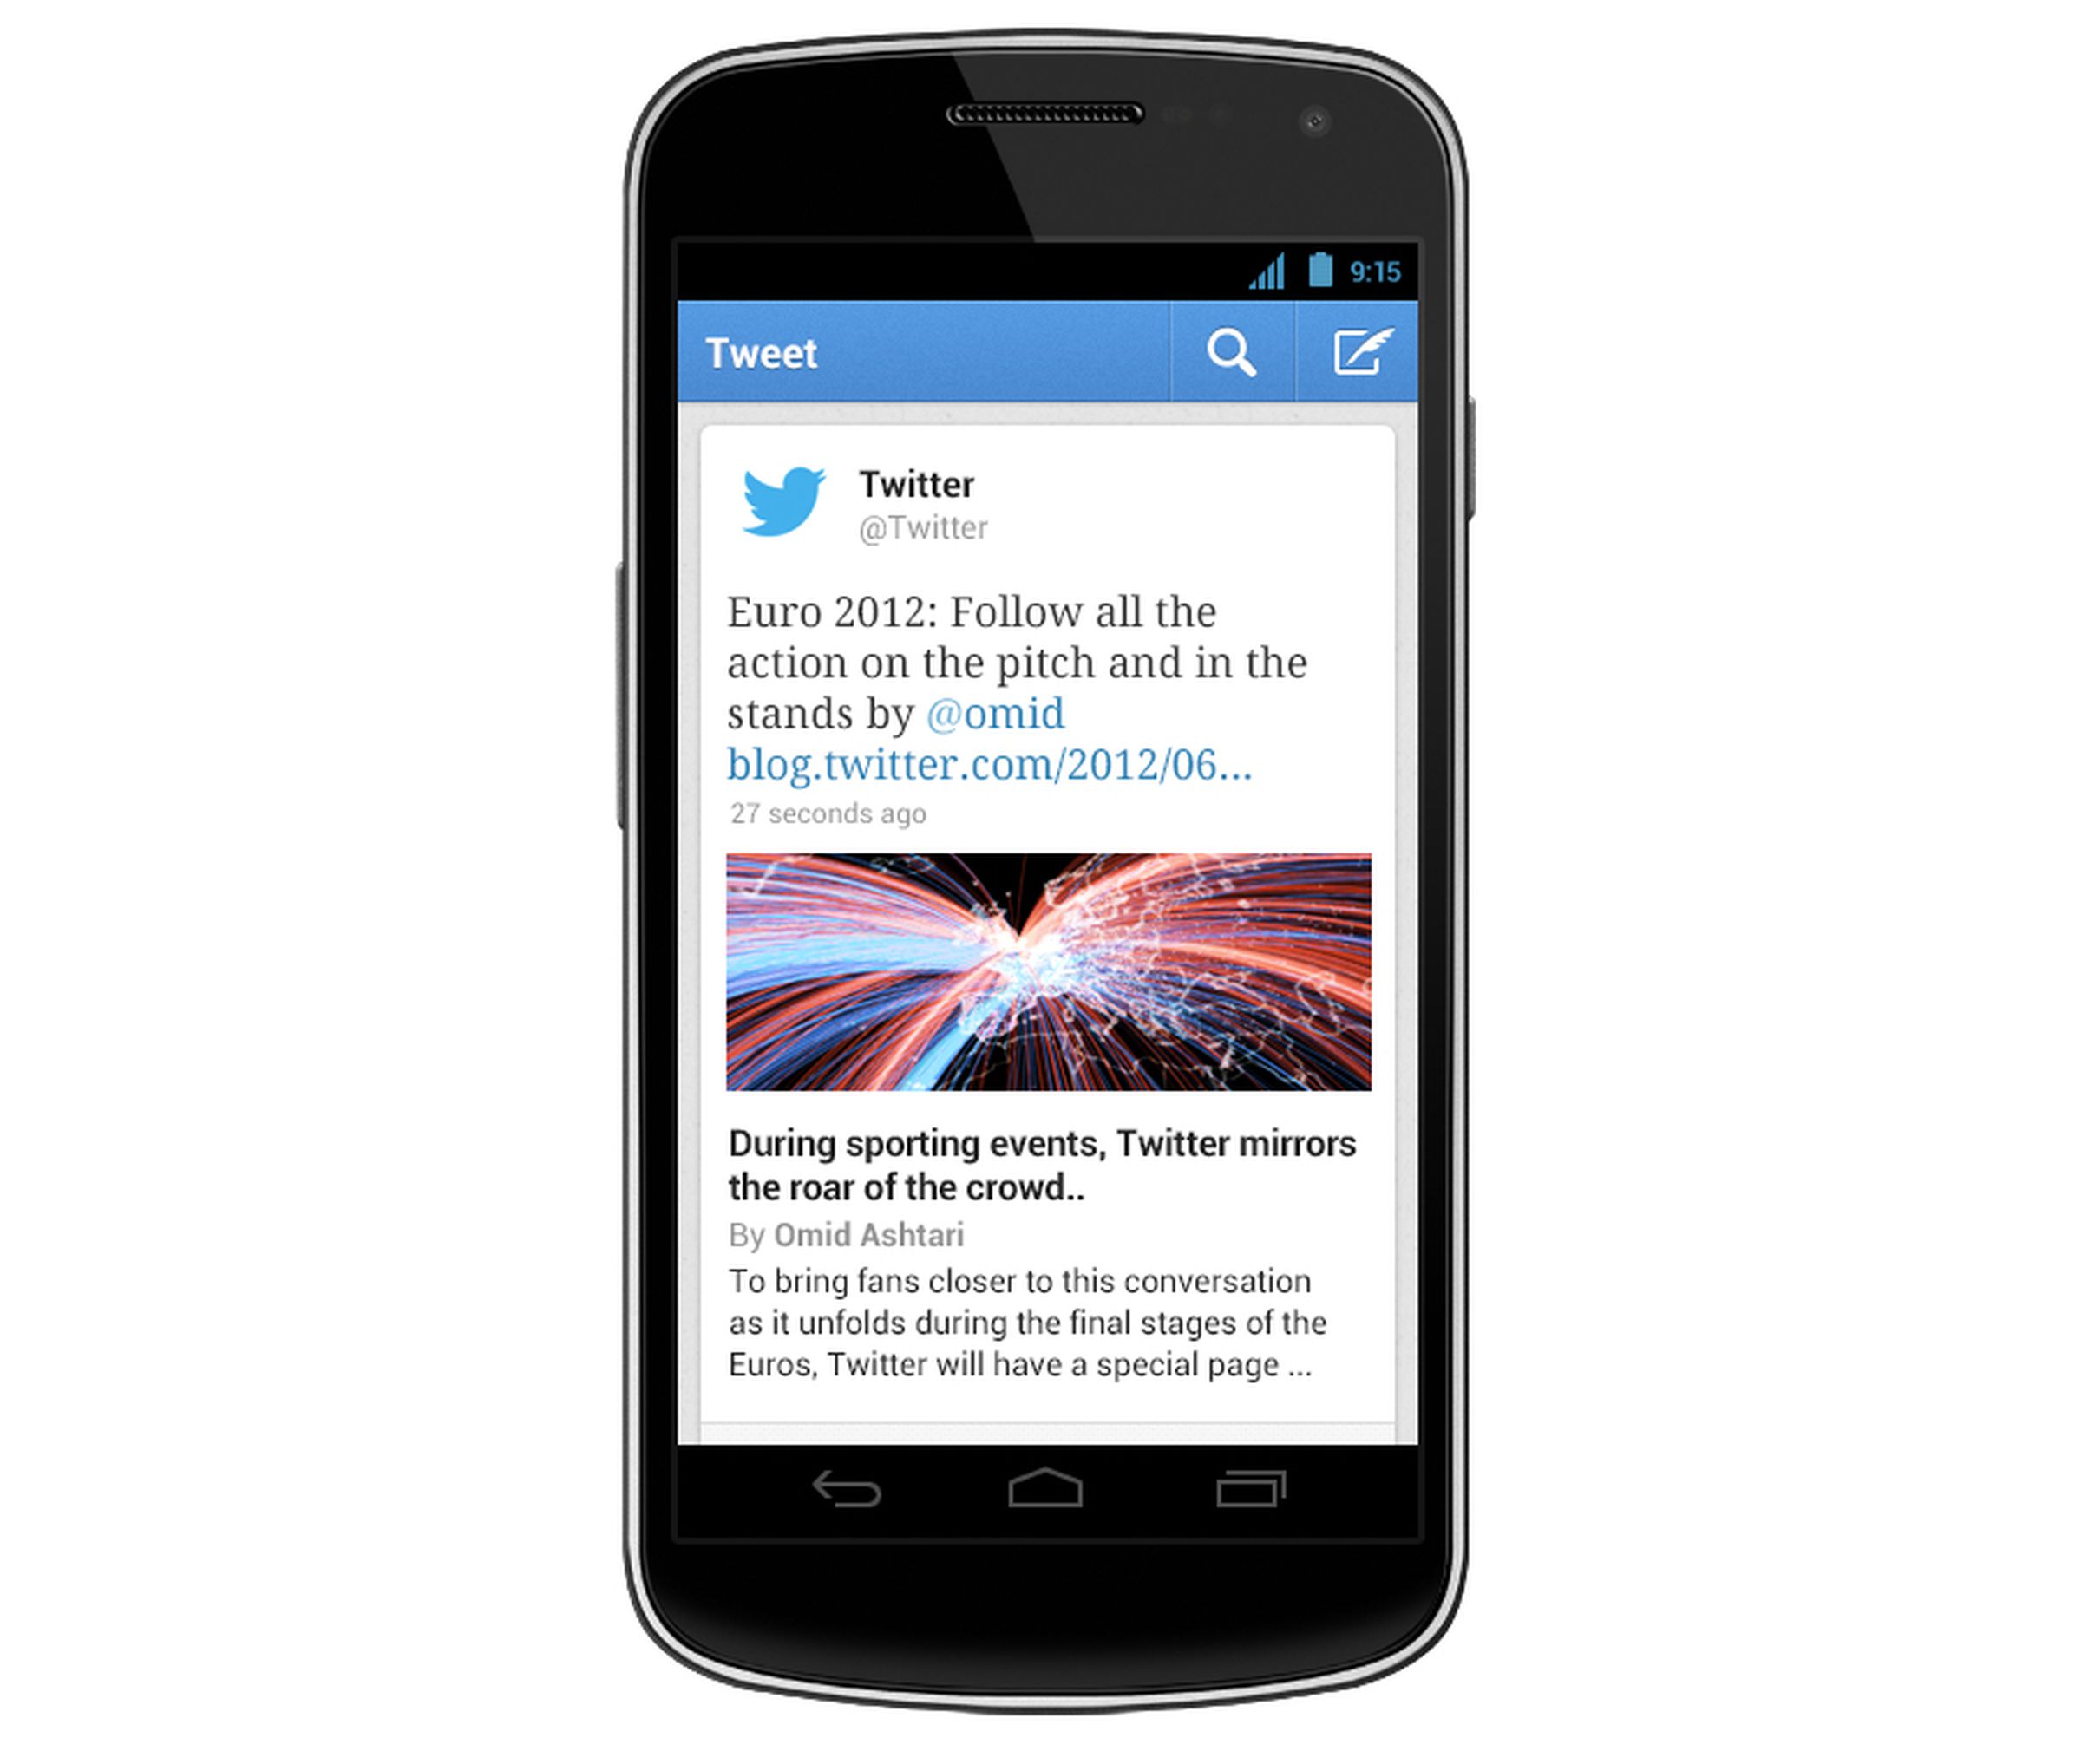 Twitter 4.3 for iOS and 3.3 for Android images